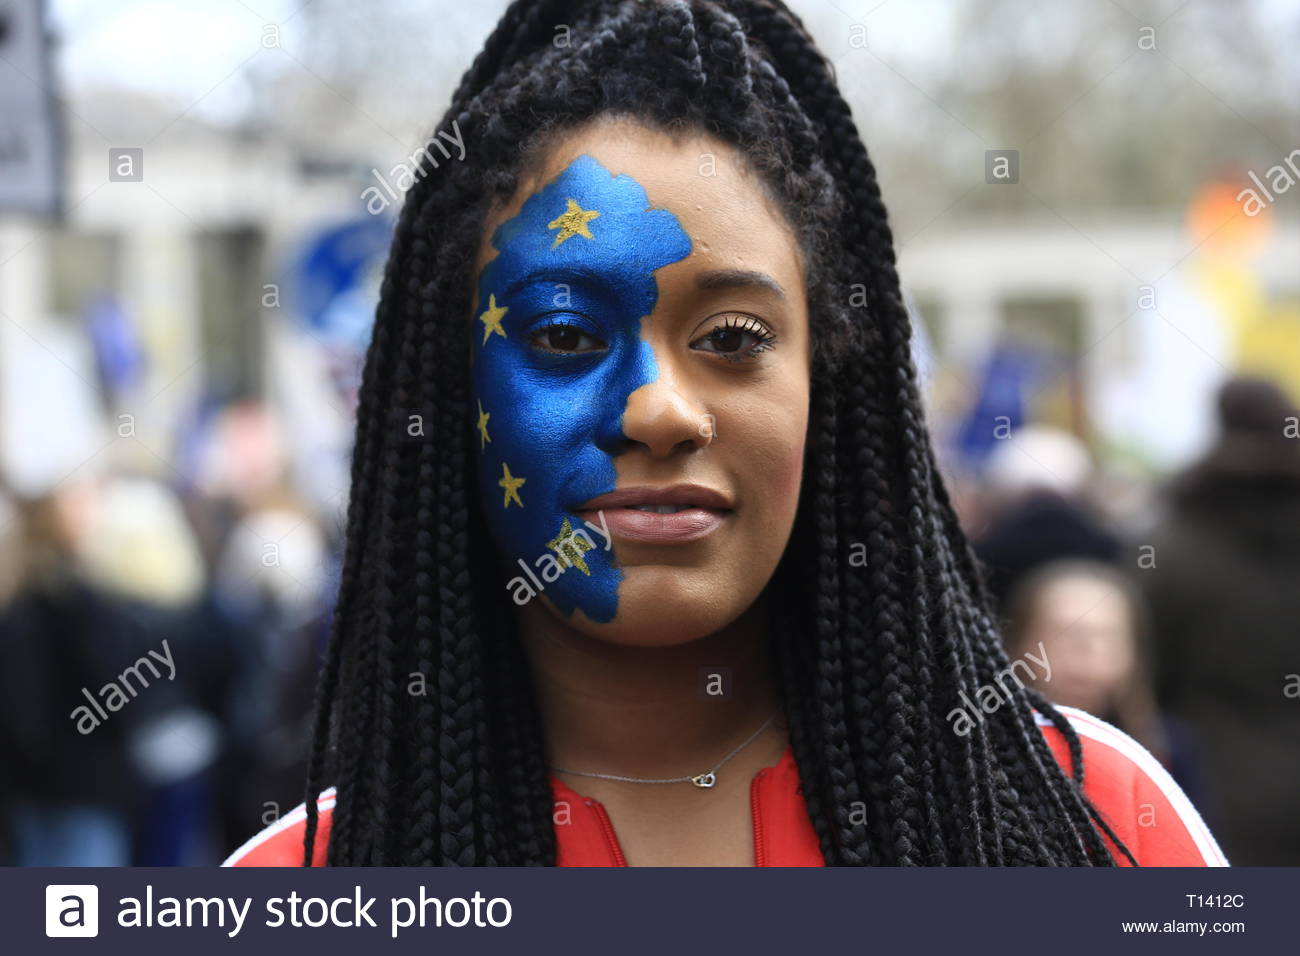 London, UK. 23rd Mar 2019. Supporters of a final say on leaving the EU have started gathering in London for the protest which will end up in Westminster. This young woman was photographed near Park Lane. Many well known speakers including Tom Watson has said he will take part in the rally. Other speakers so far have included Caroline Lucas and Clive Lewis. Credit: Clearpix/Alamy Live News Credit: Clearpix/Alamy Live News Stock Photo